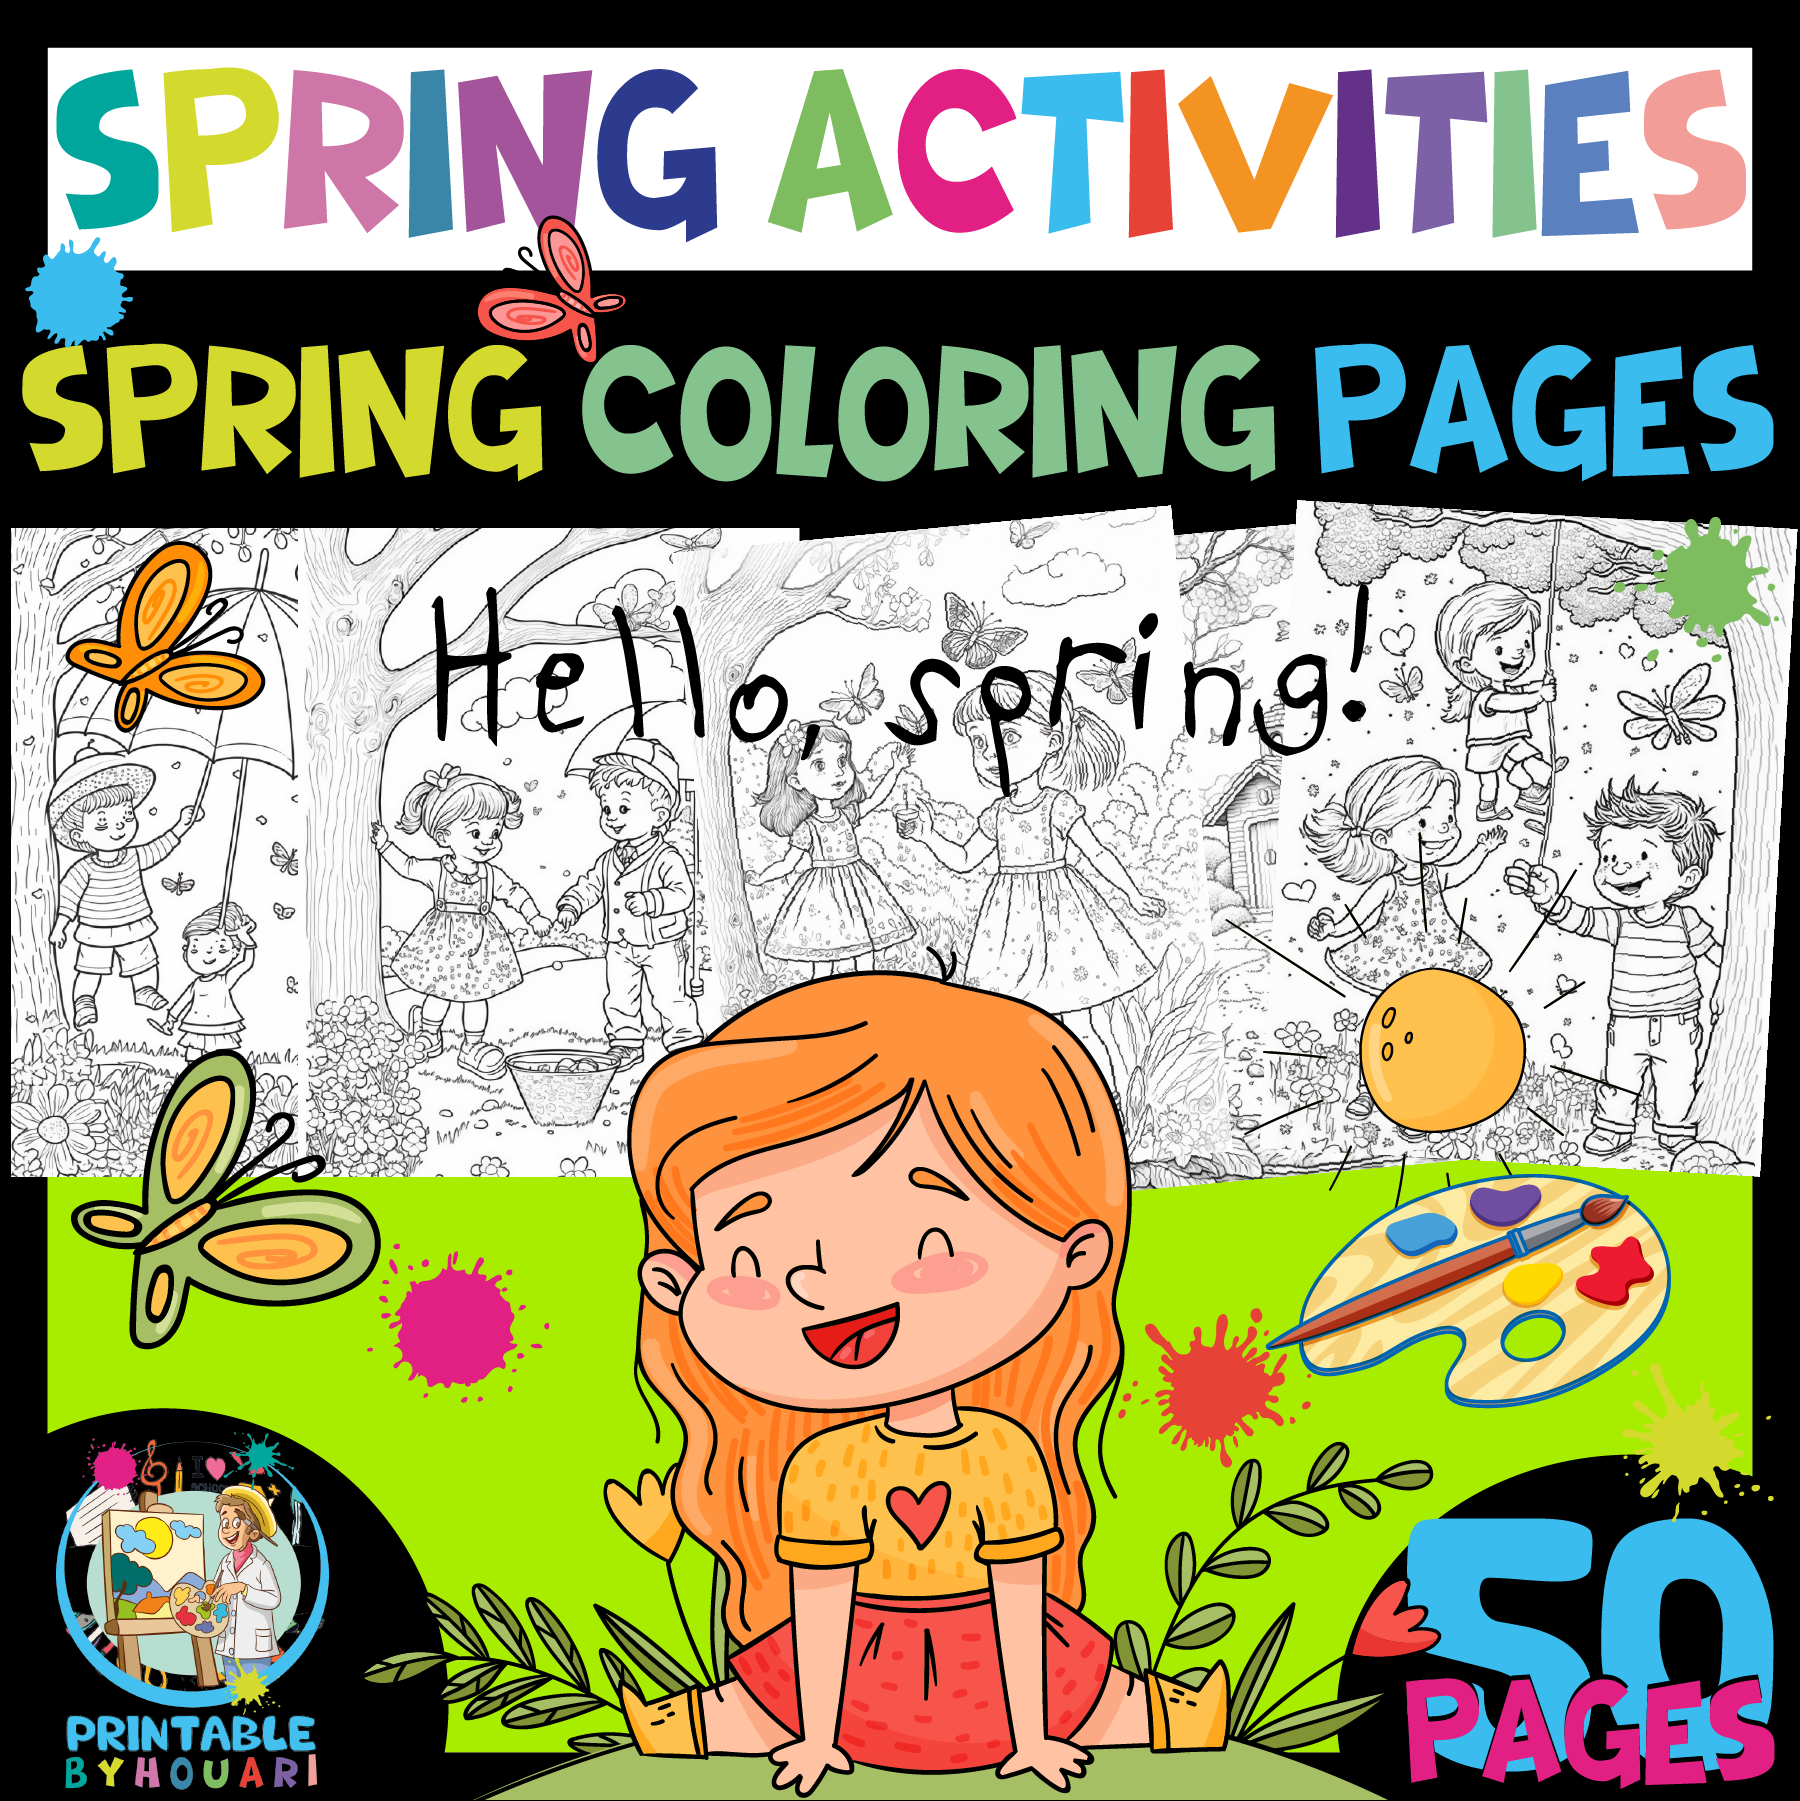 Get ready for spring and summer fun with our printable coloring pages for kids